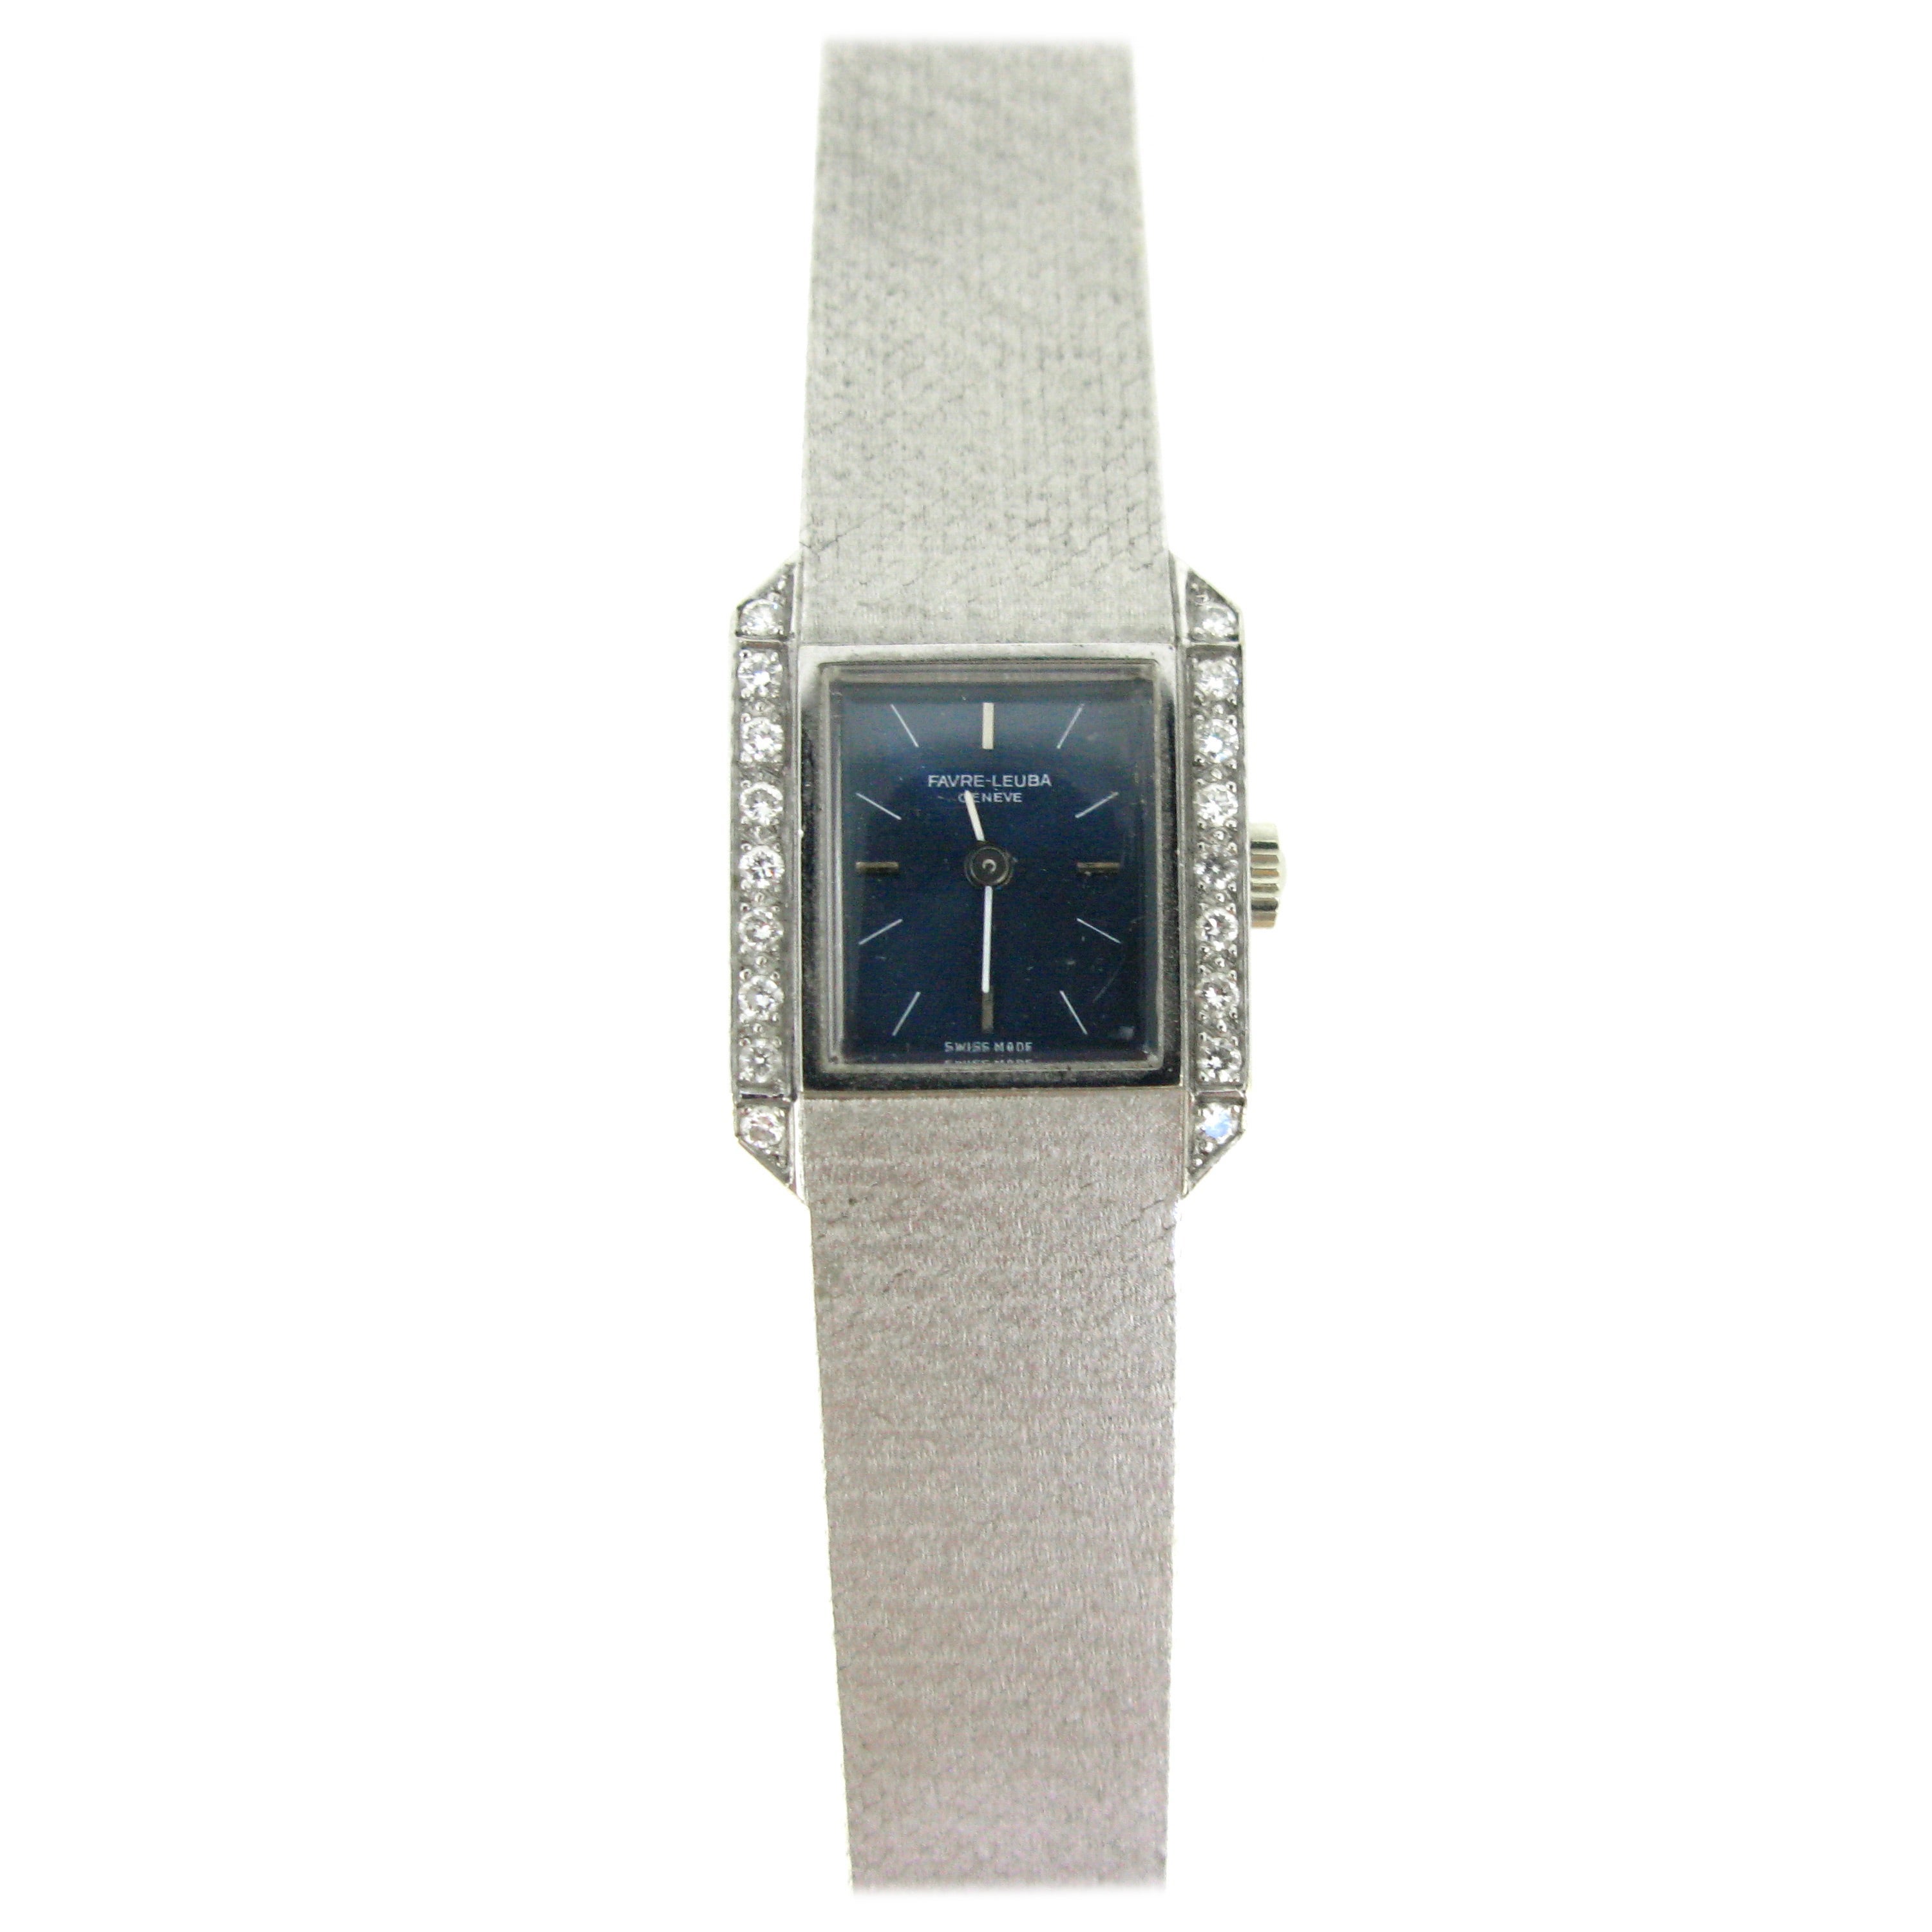 Jewellery Watches Wrist Watches Womens Wrist Watches Vintage Favre leube geneve ladies watch Swiss made white dial! 